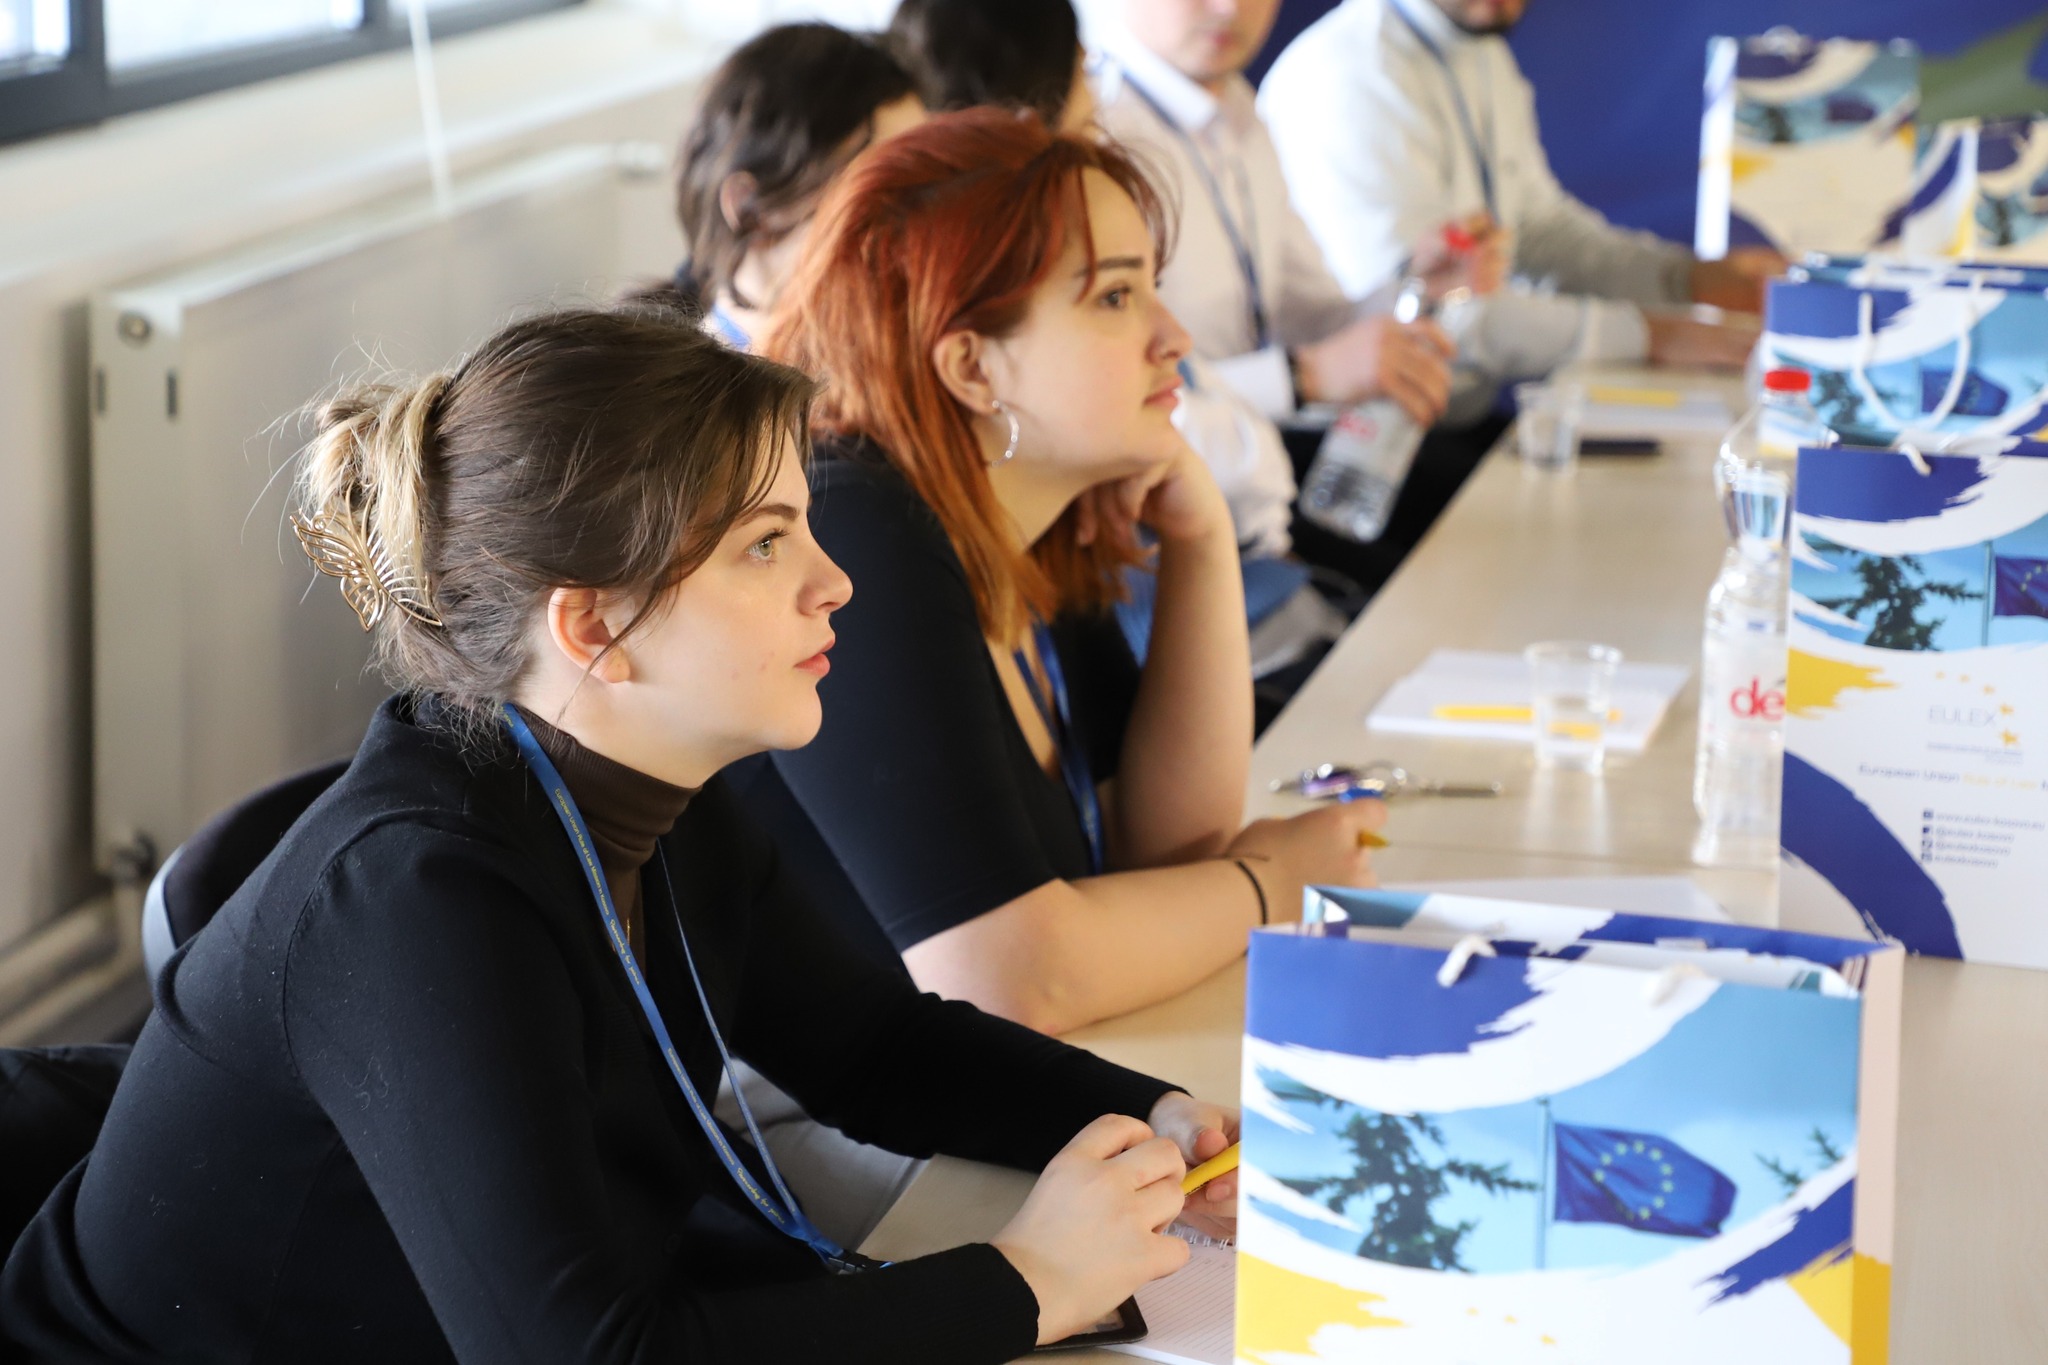 EULEX and Assist Kosovo empower Kosovo’s youth to become agents of change against gender-based violence